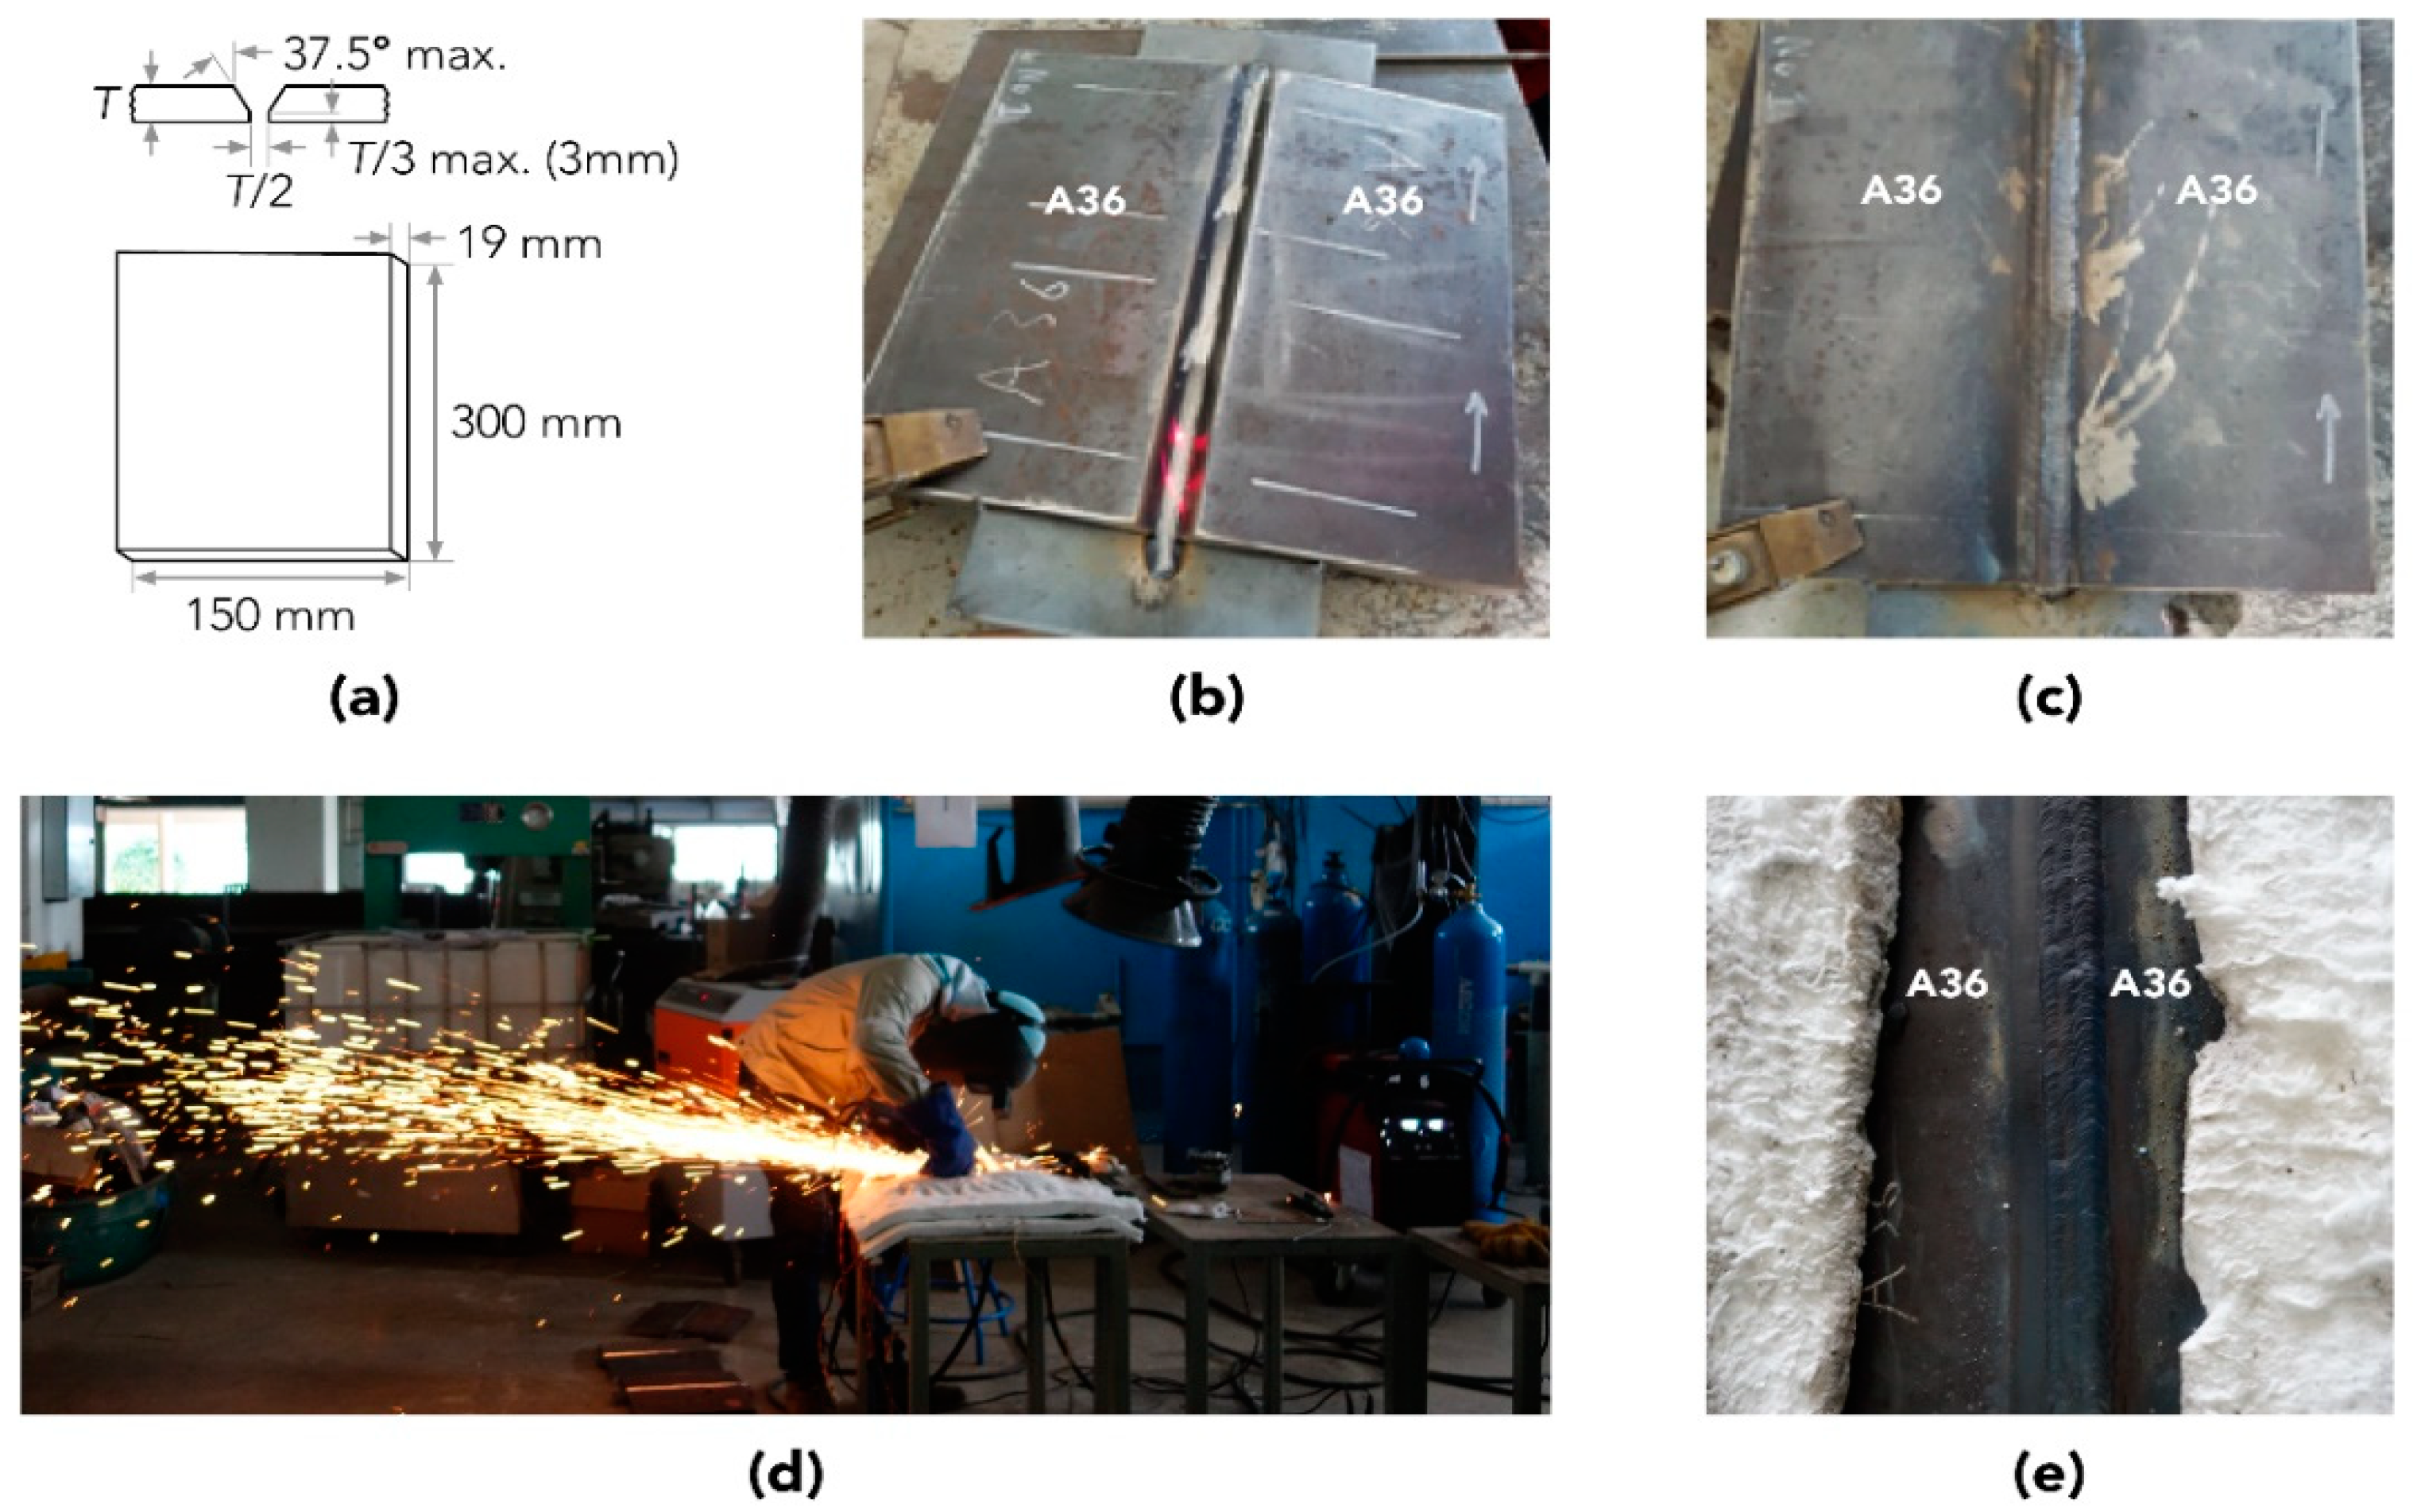 Stainless Steel Sheet Stock - 0.012 » Future Metals 1